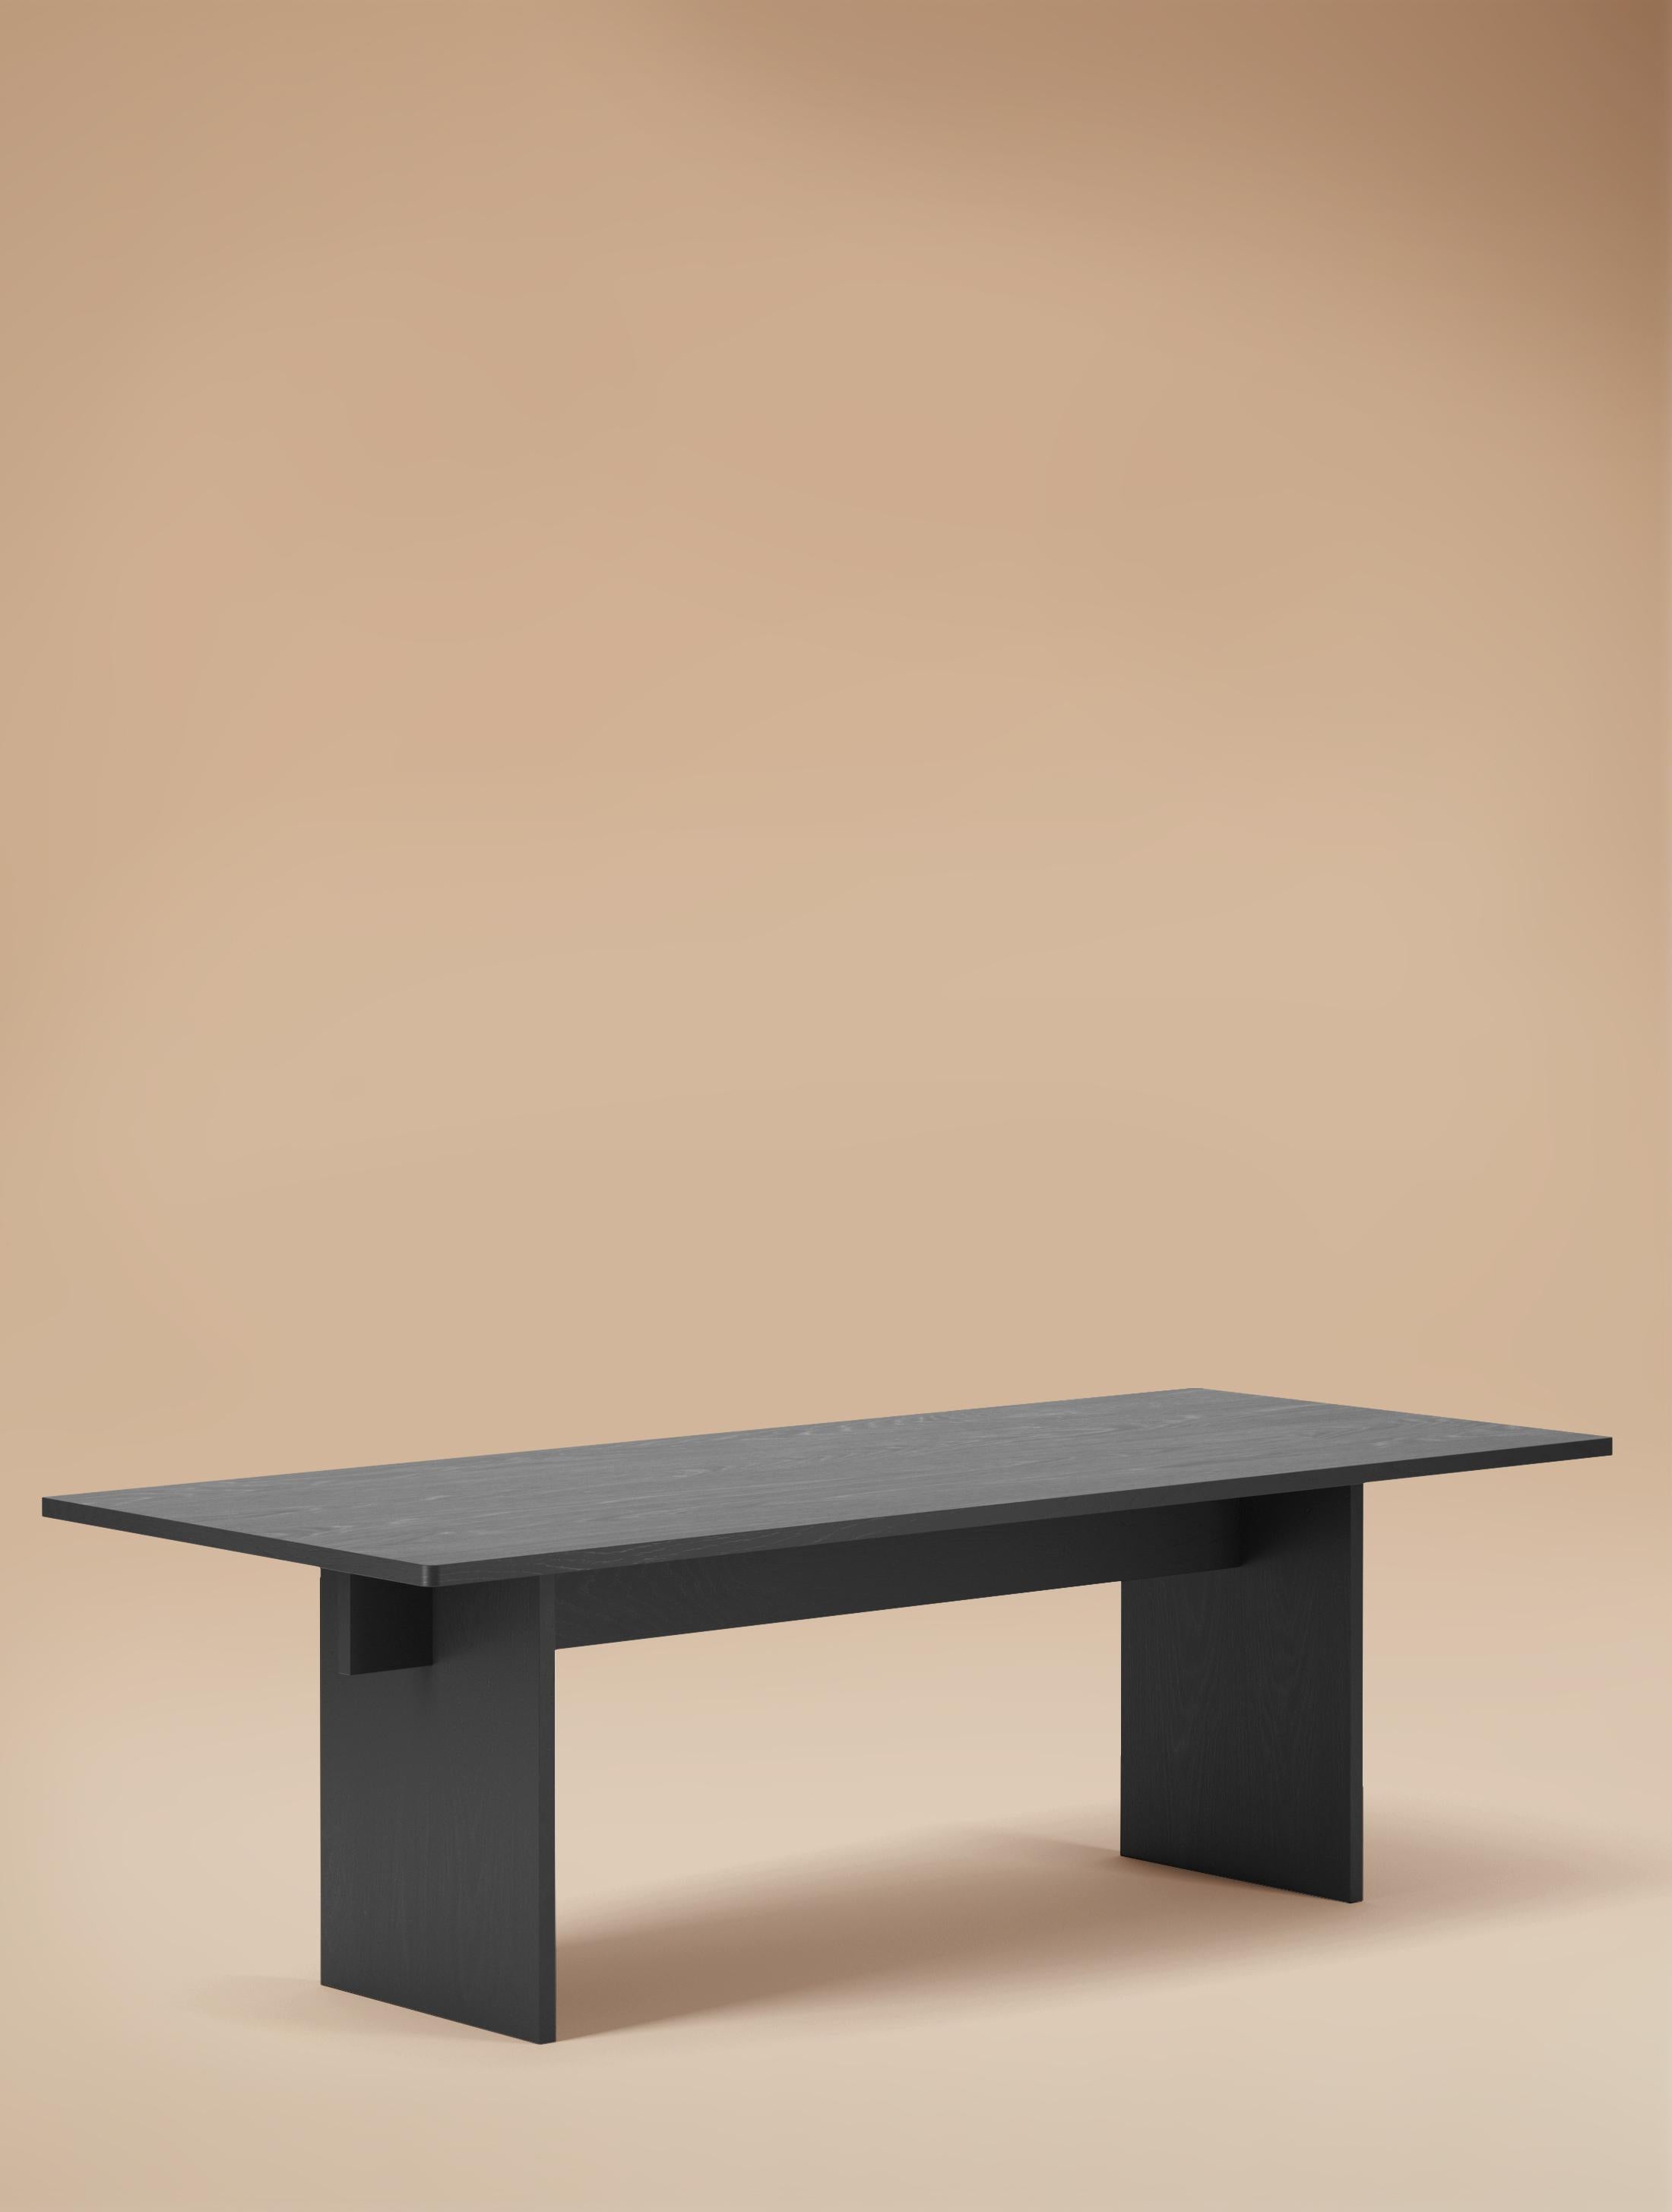 6 Seater Faure Faure Table Handcrafted in Charcoal Oak by Kevin Frankental  12